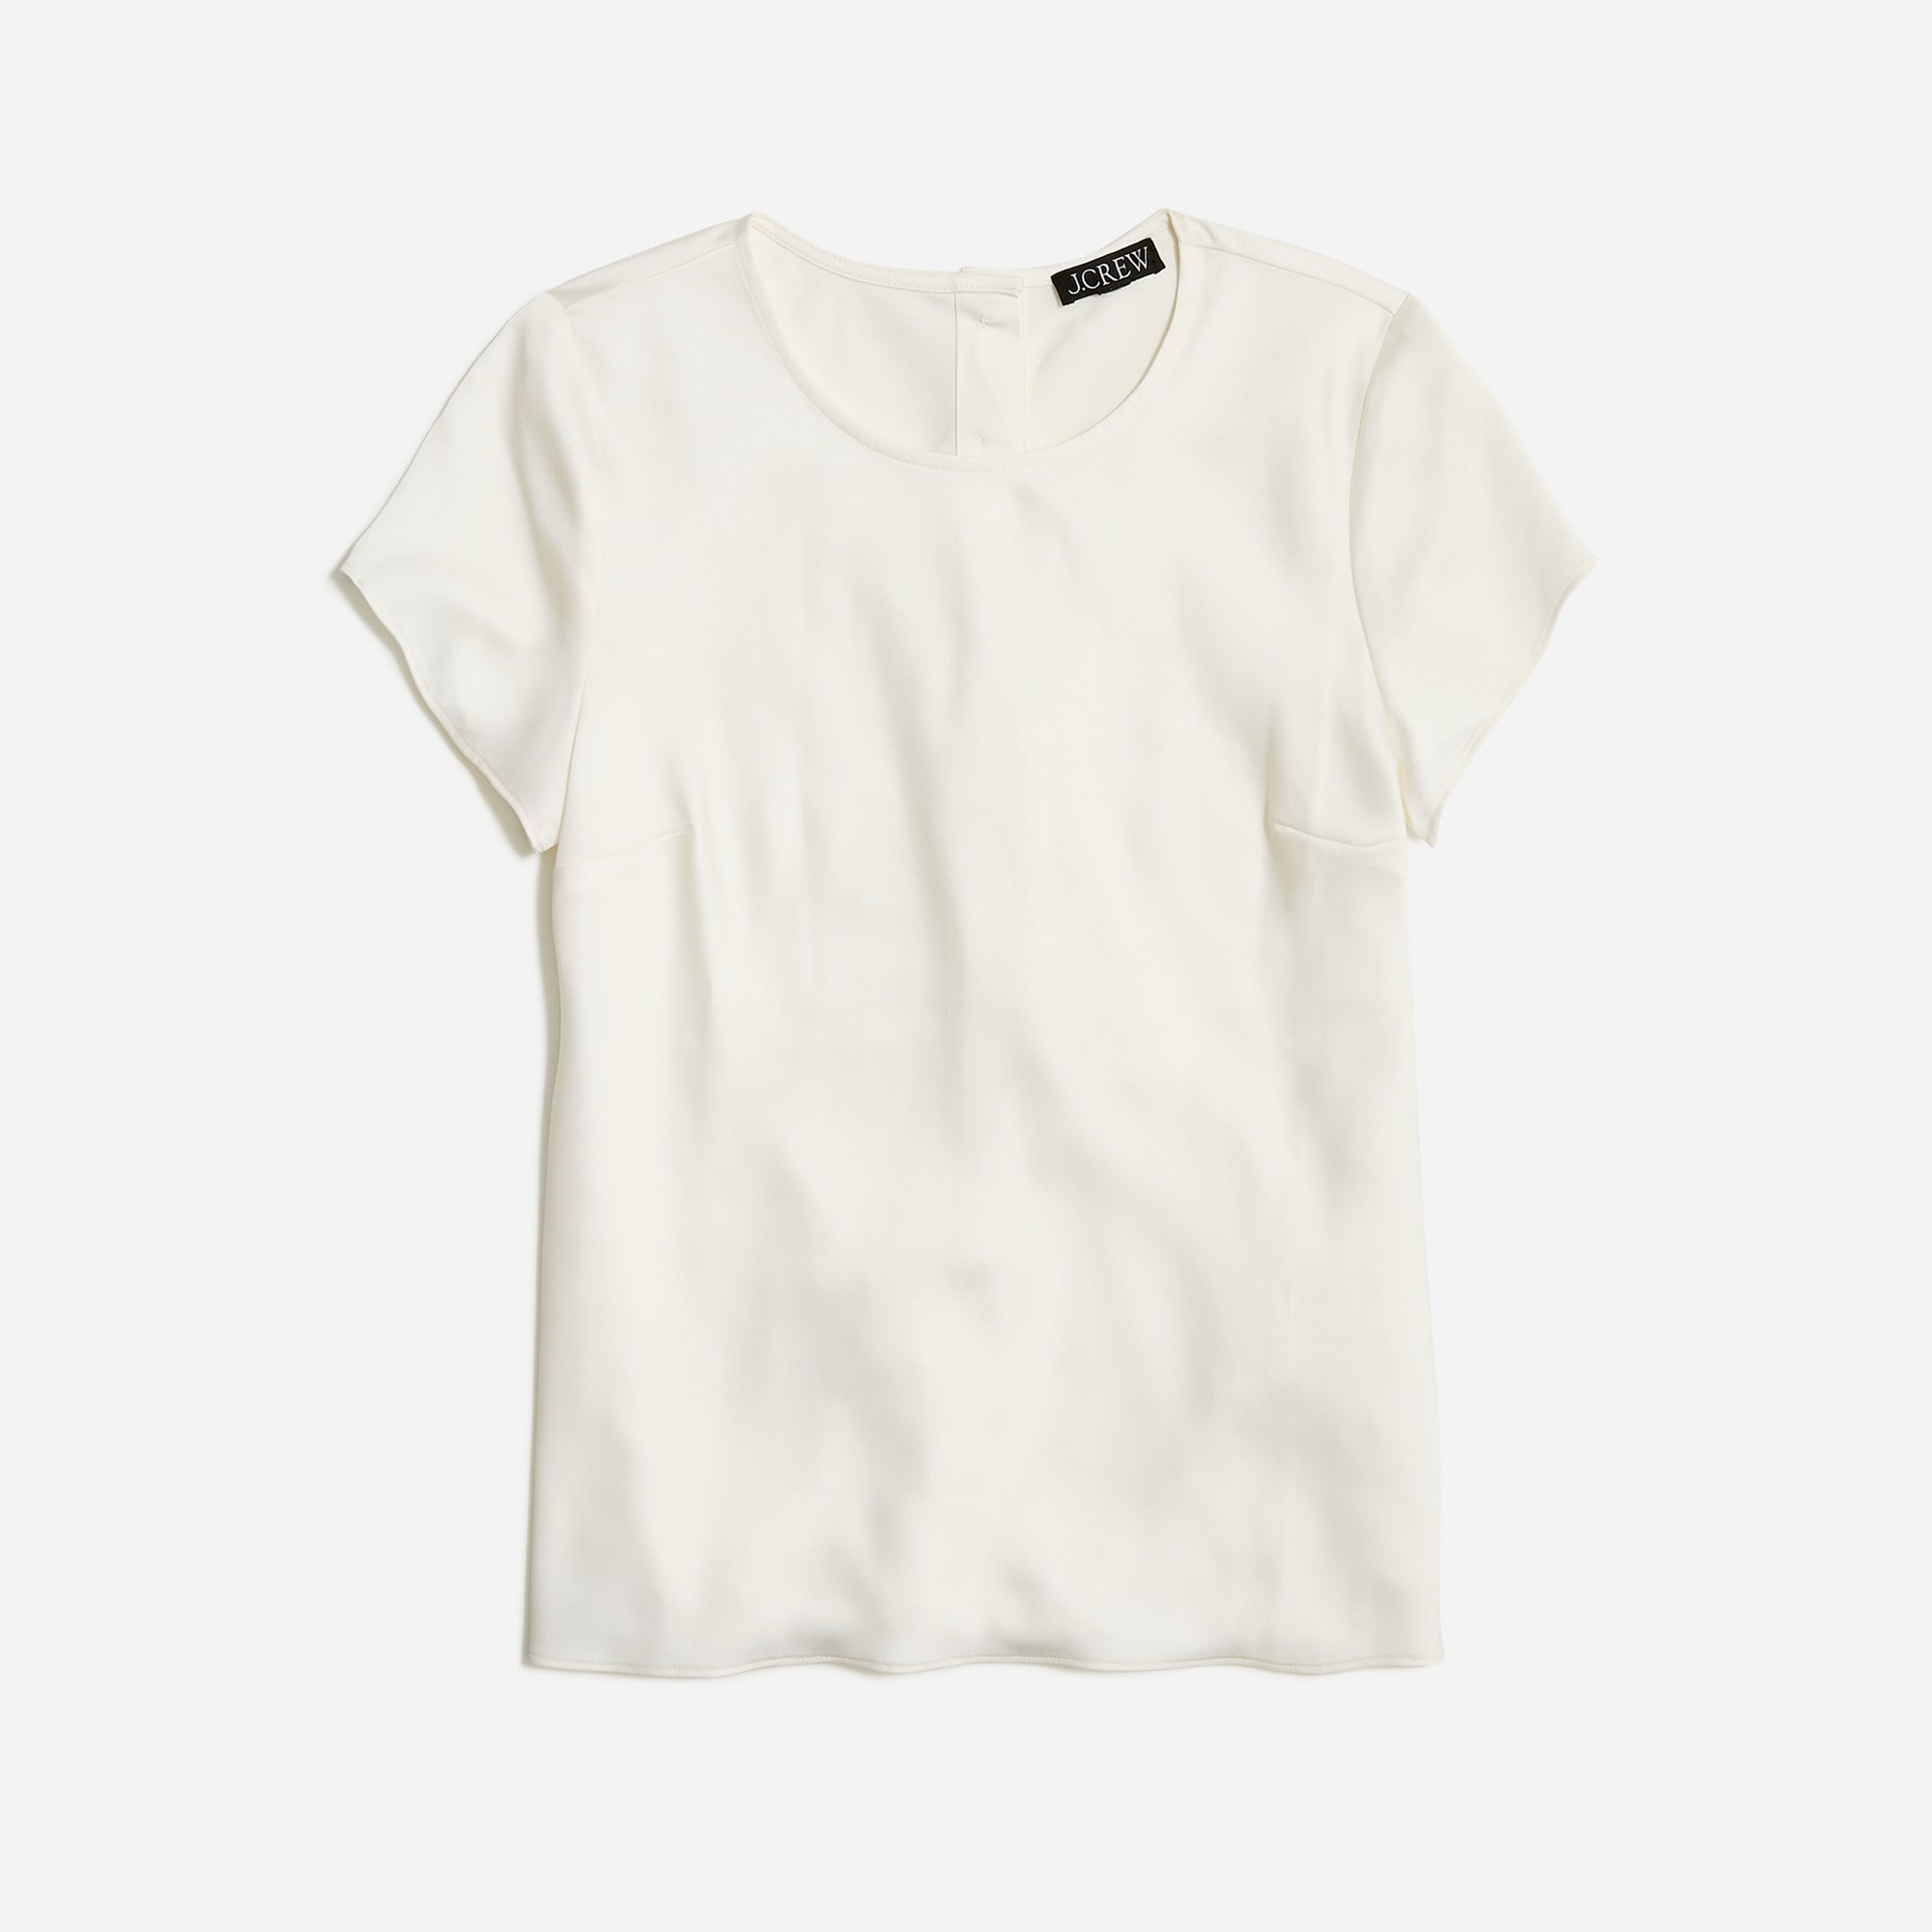 Jcrew Short-sleeve button-back top in everyday crepe